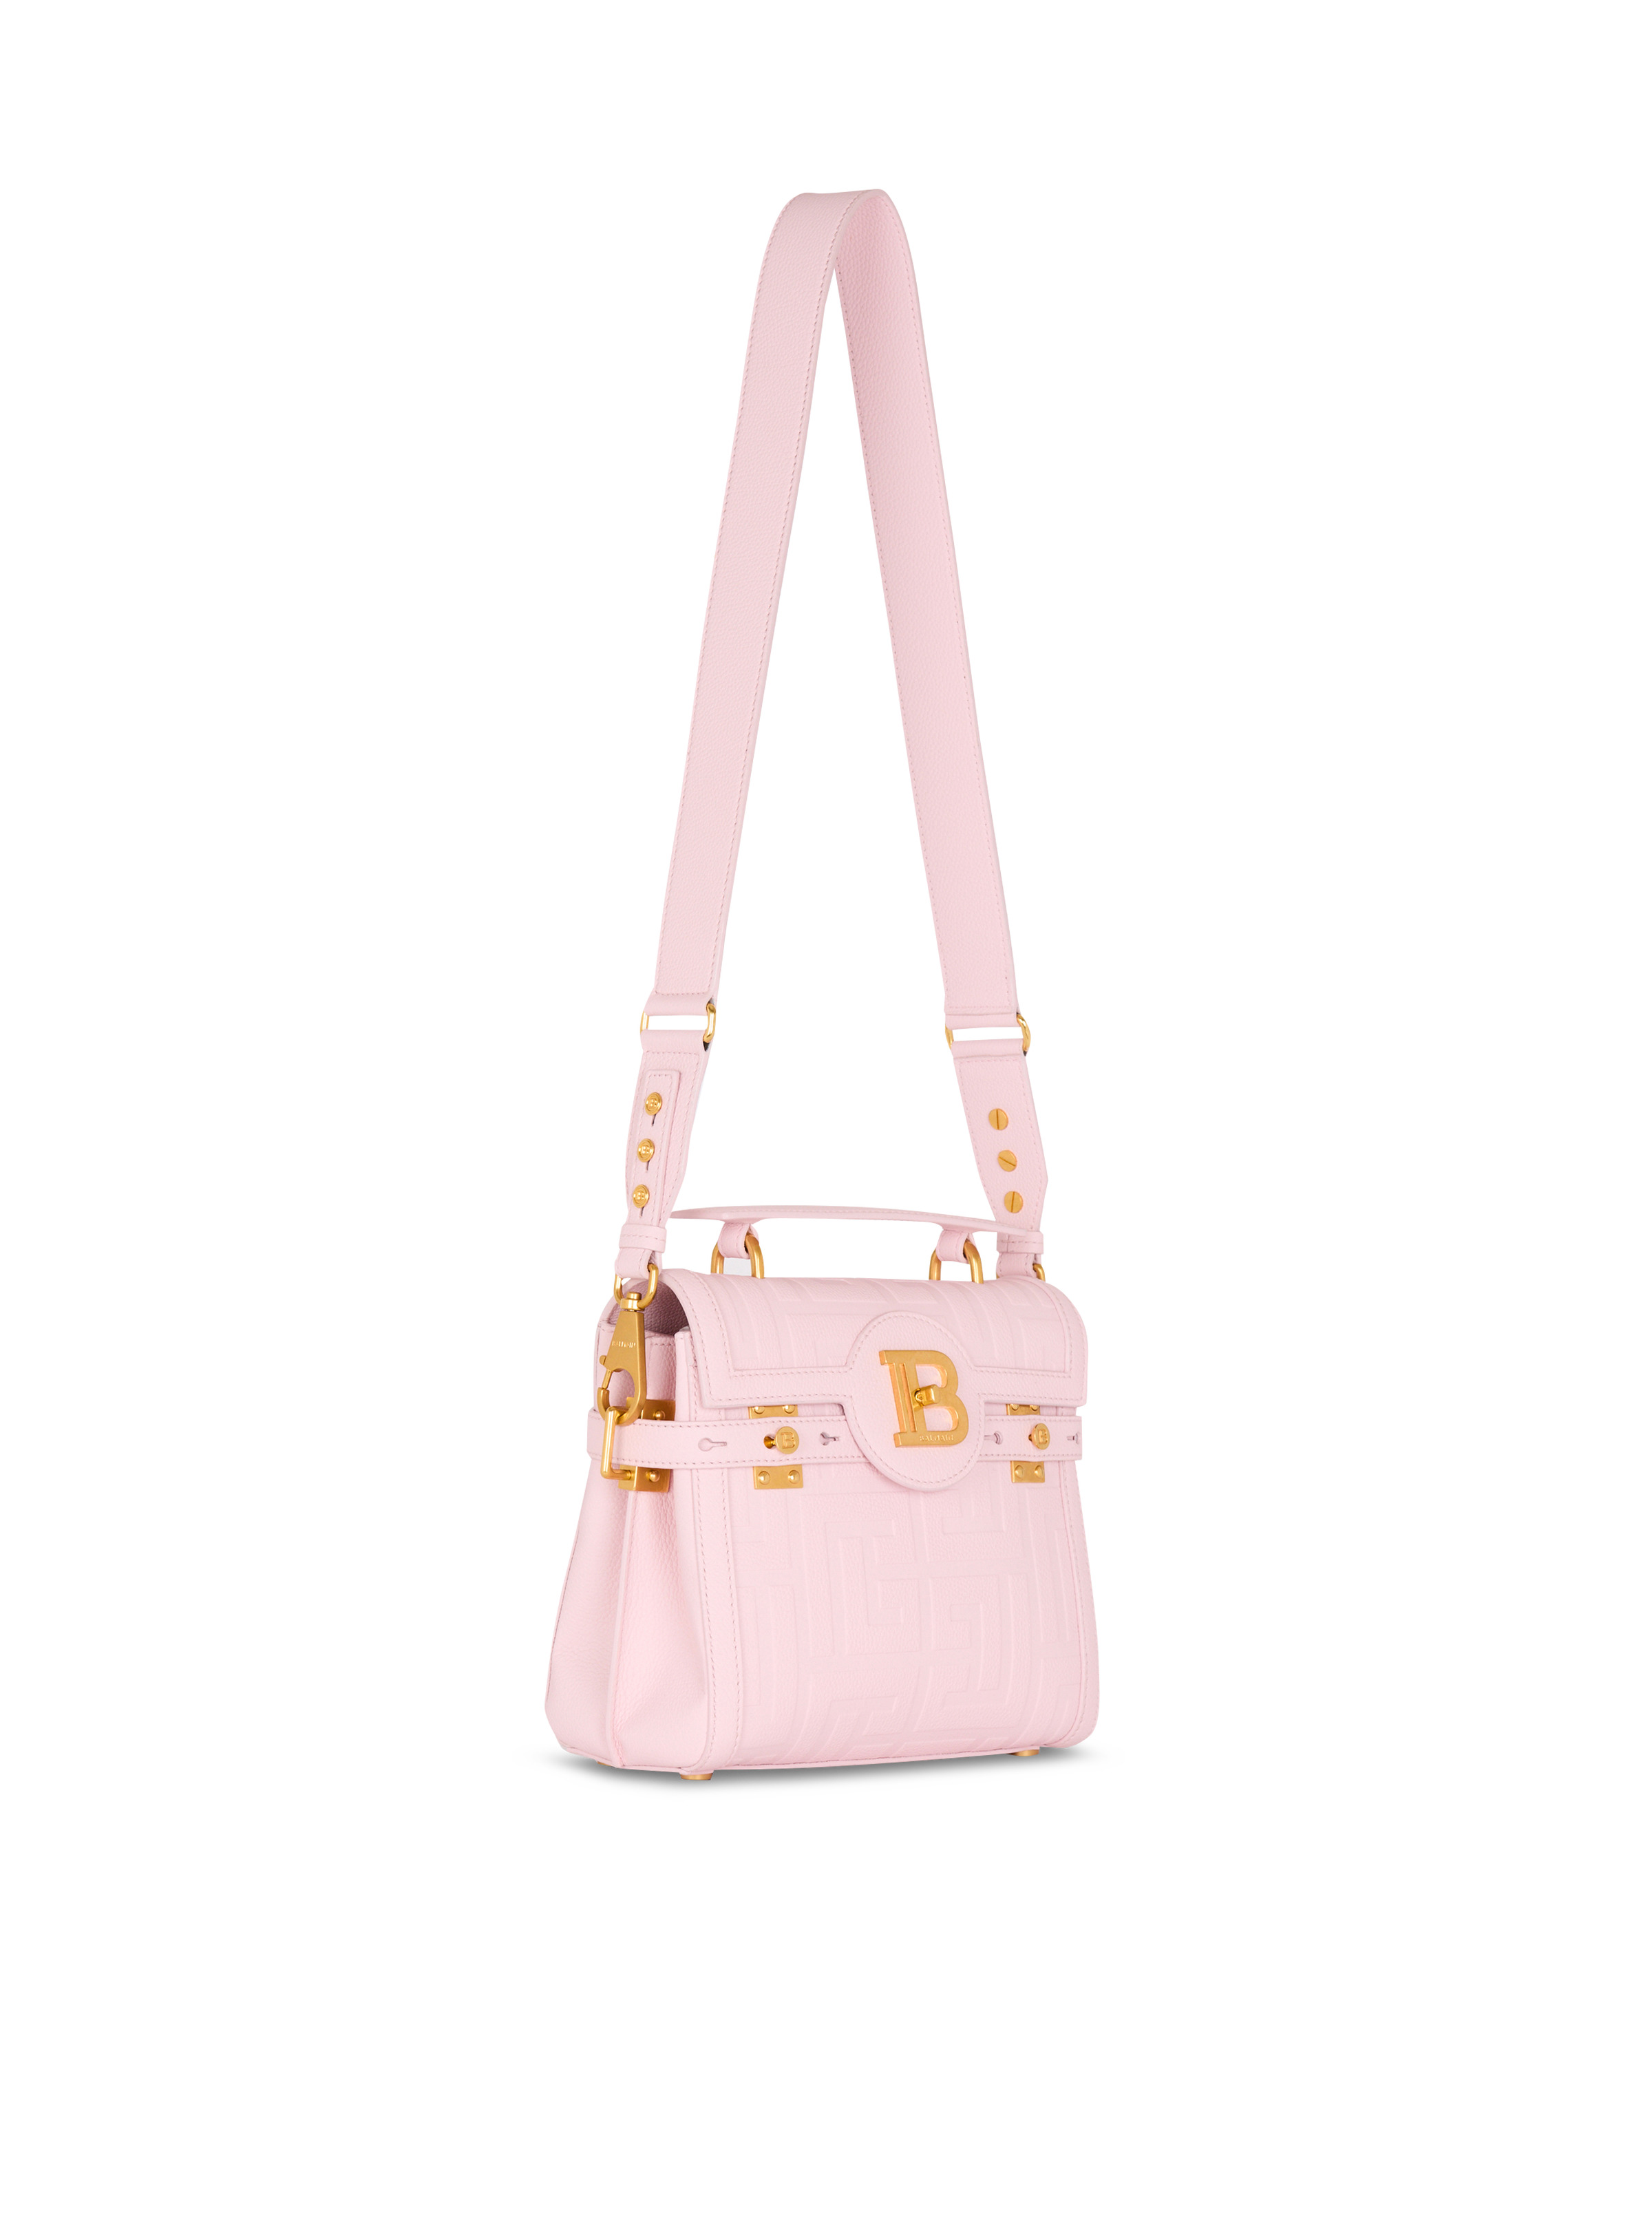 B-Buzz 23 bag in grained PB Labyrinth leather - 3